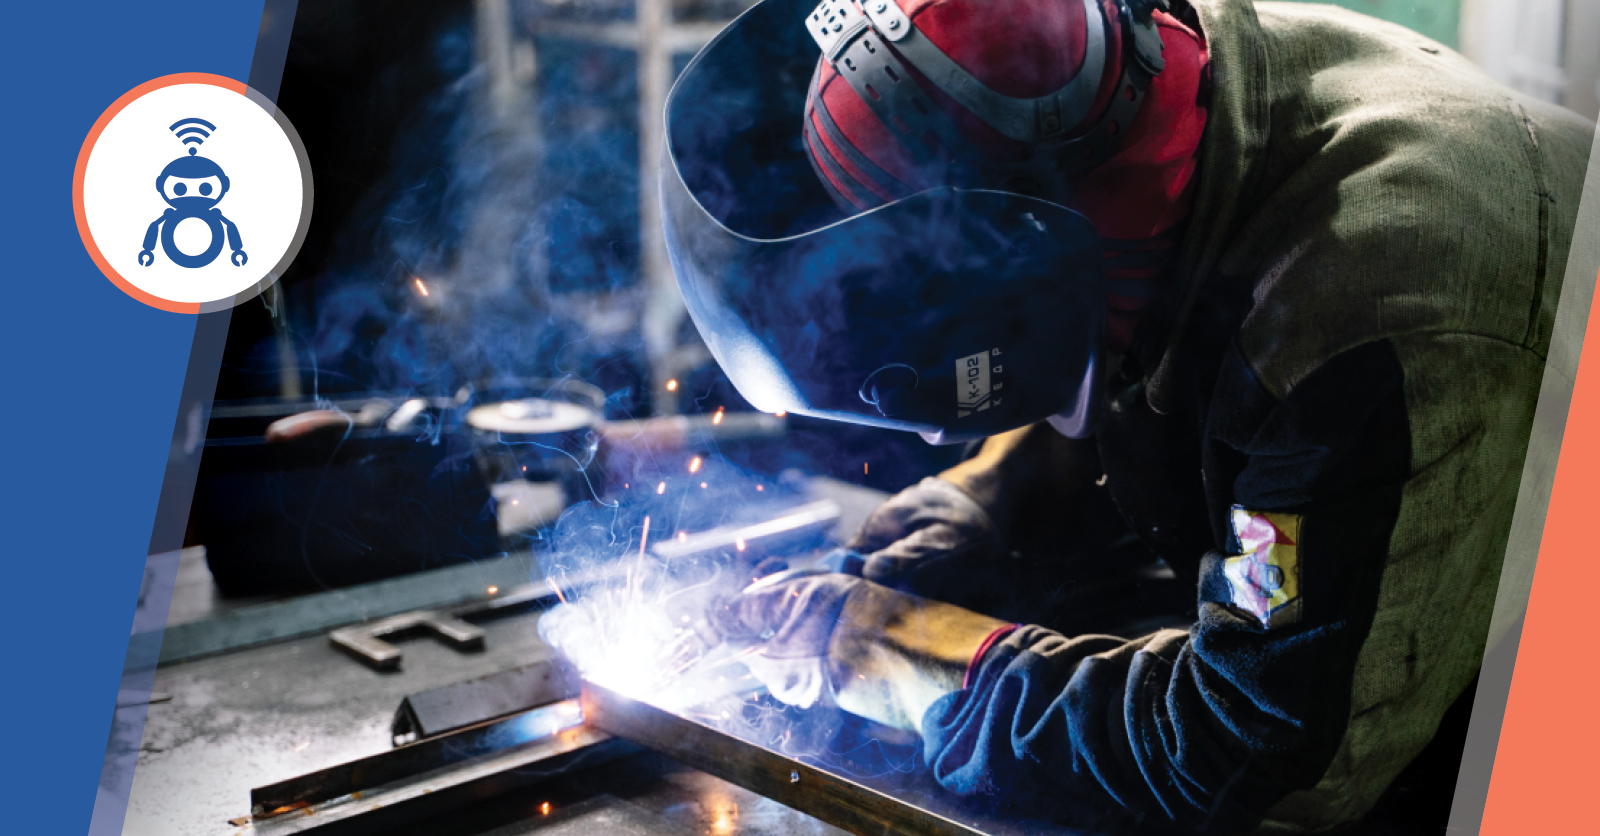 How To Hire a Welder: Finding the Right Fit for Your Company